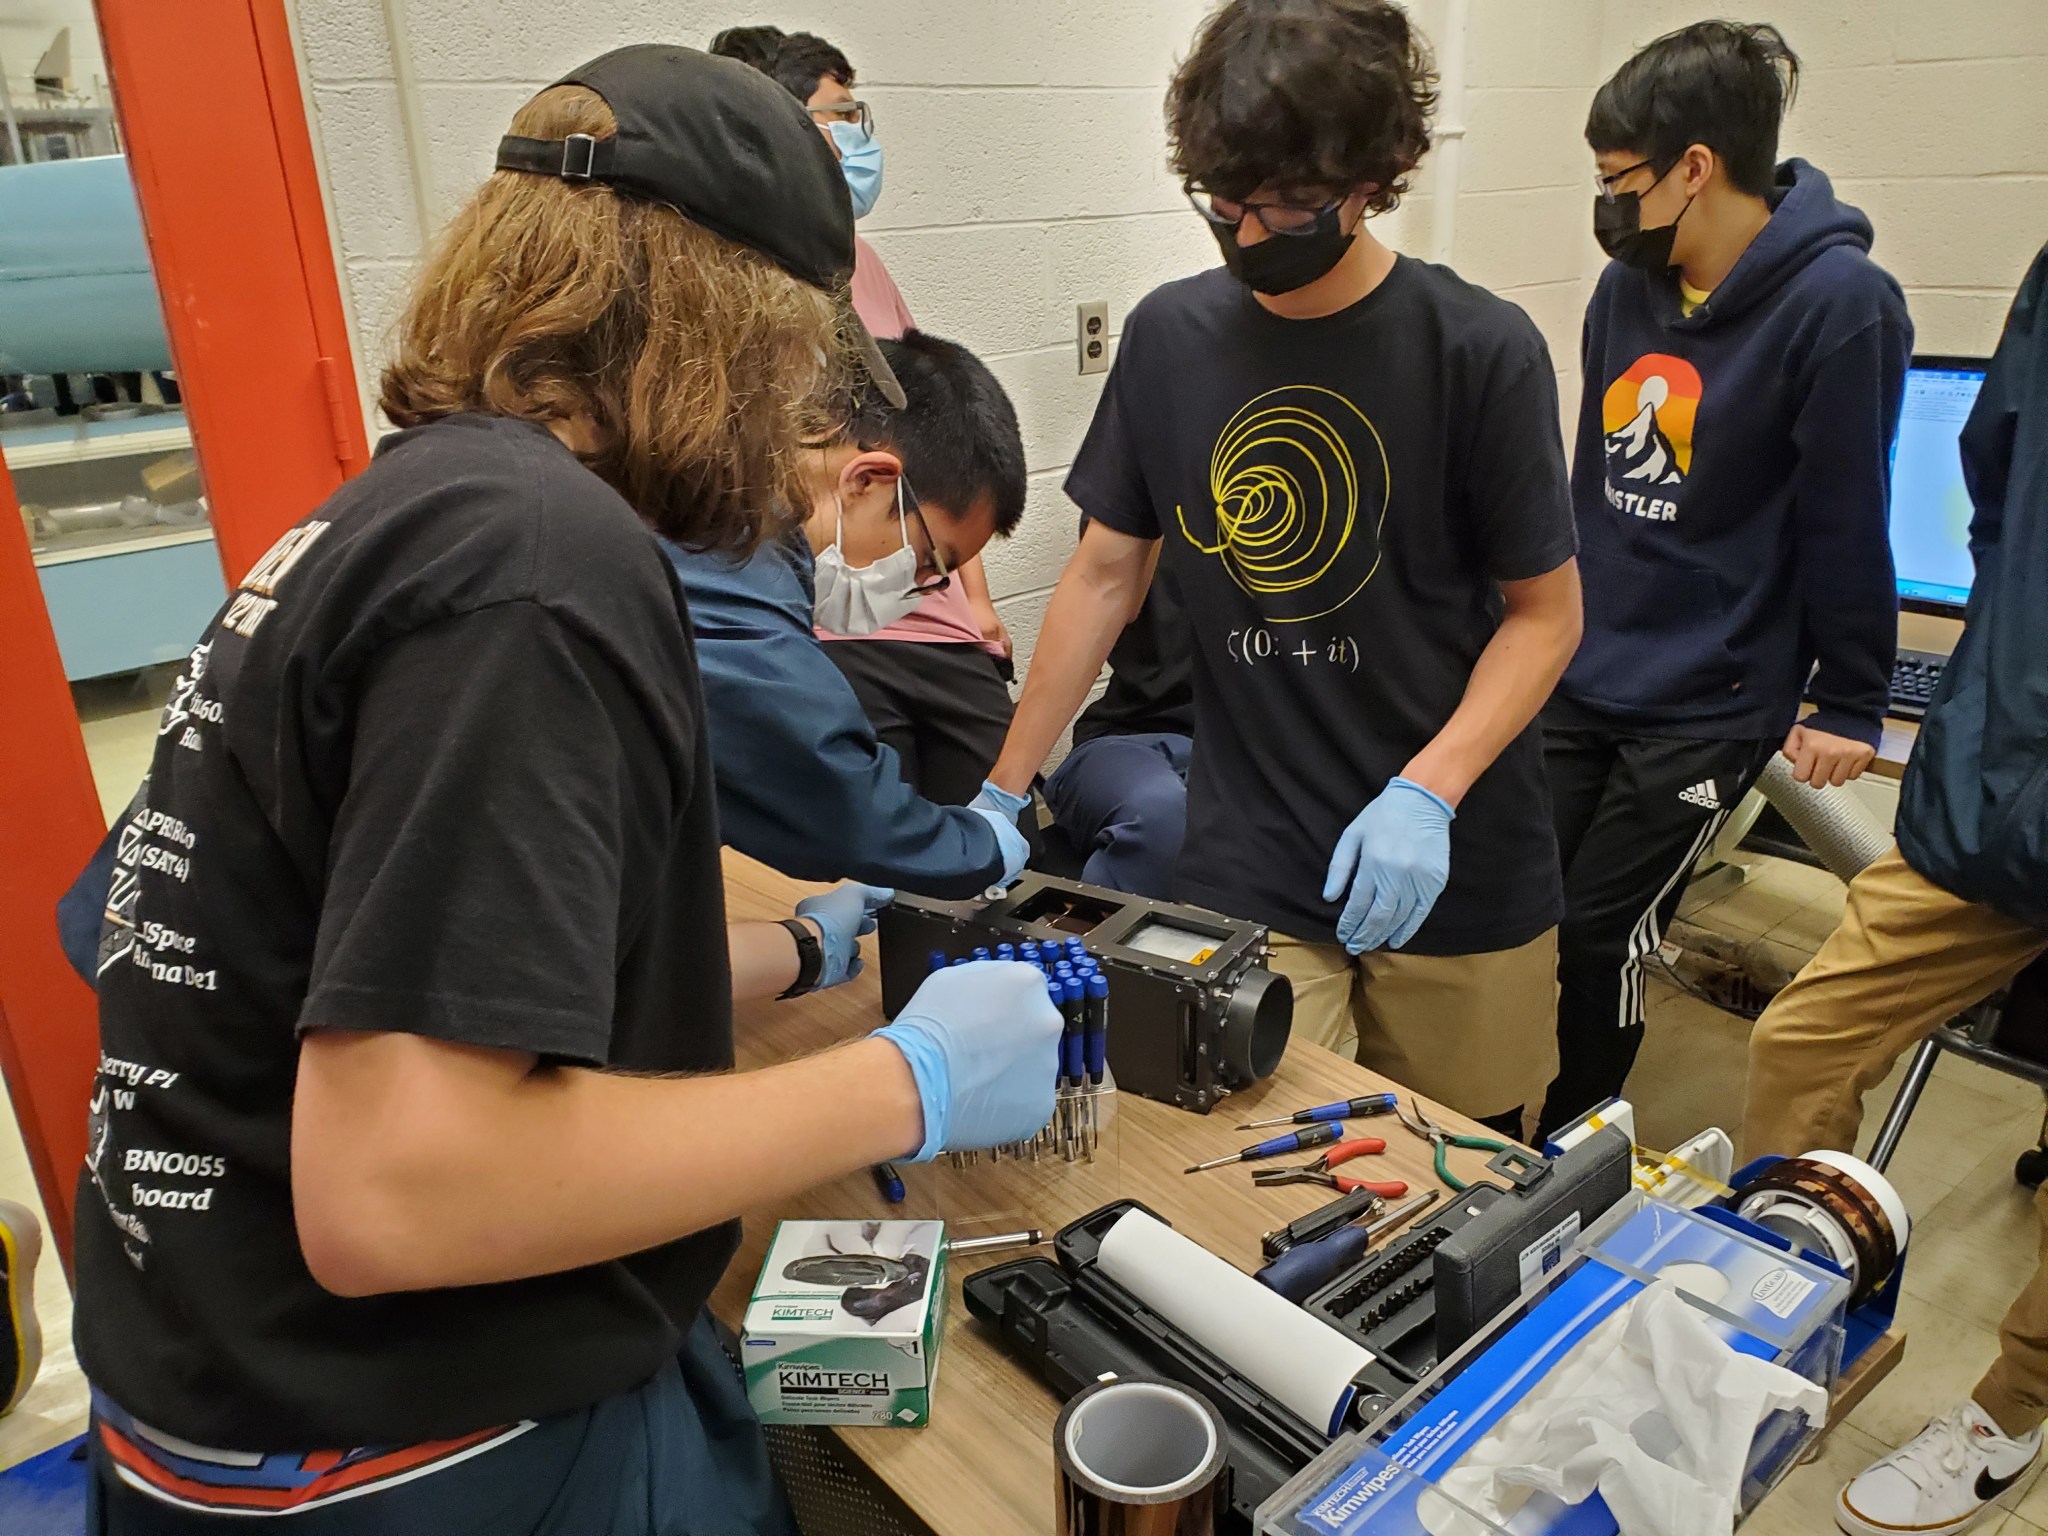 A group of students at Thomas Jefferson High School for Science and Technology work on their CubeSat